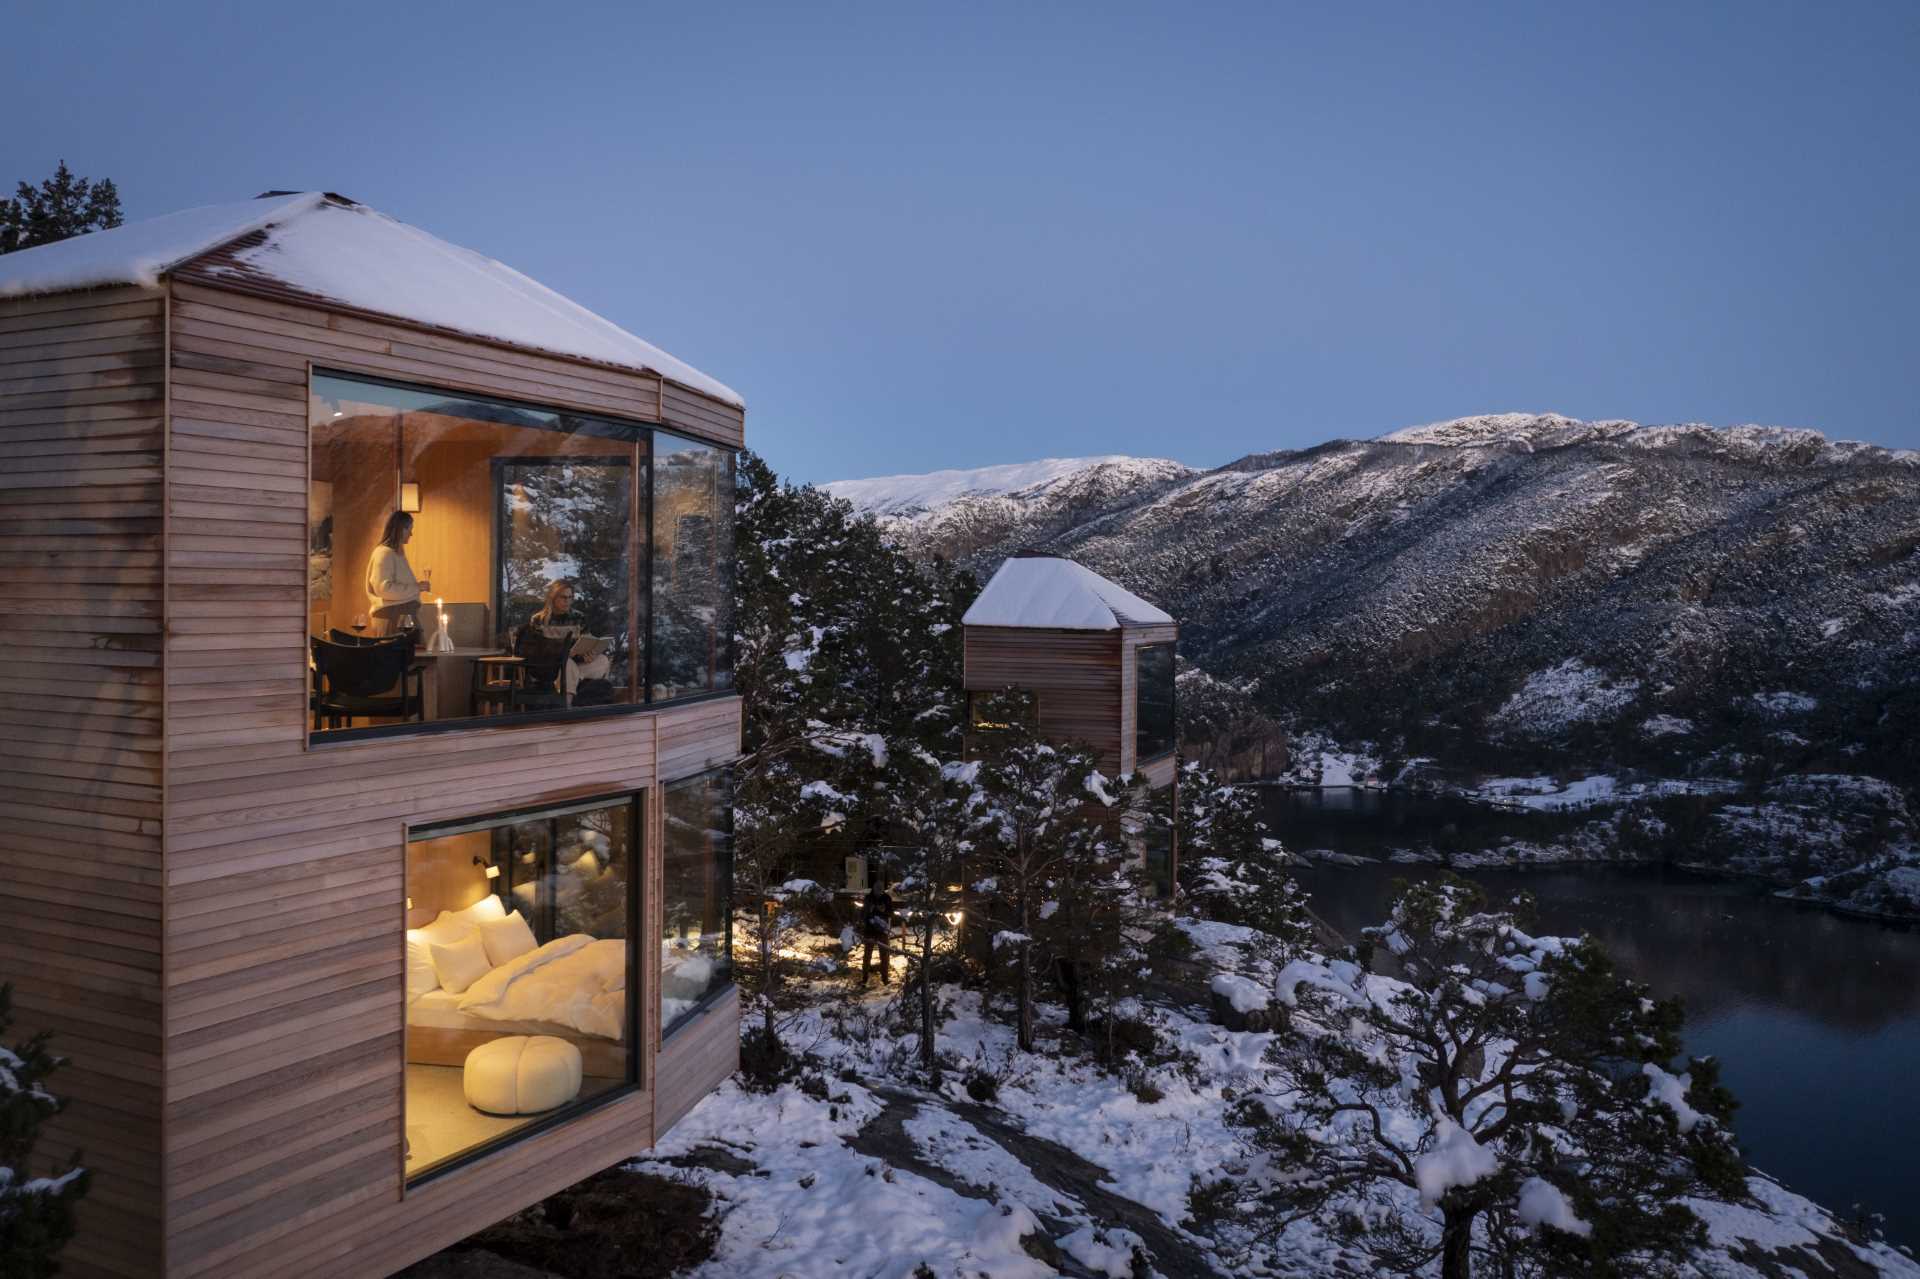 Modern cabins that have been built to blend in with the landscape with a minimal footprint on the surrounding nature.